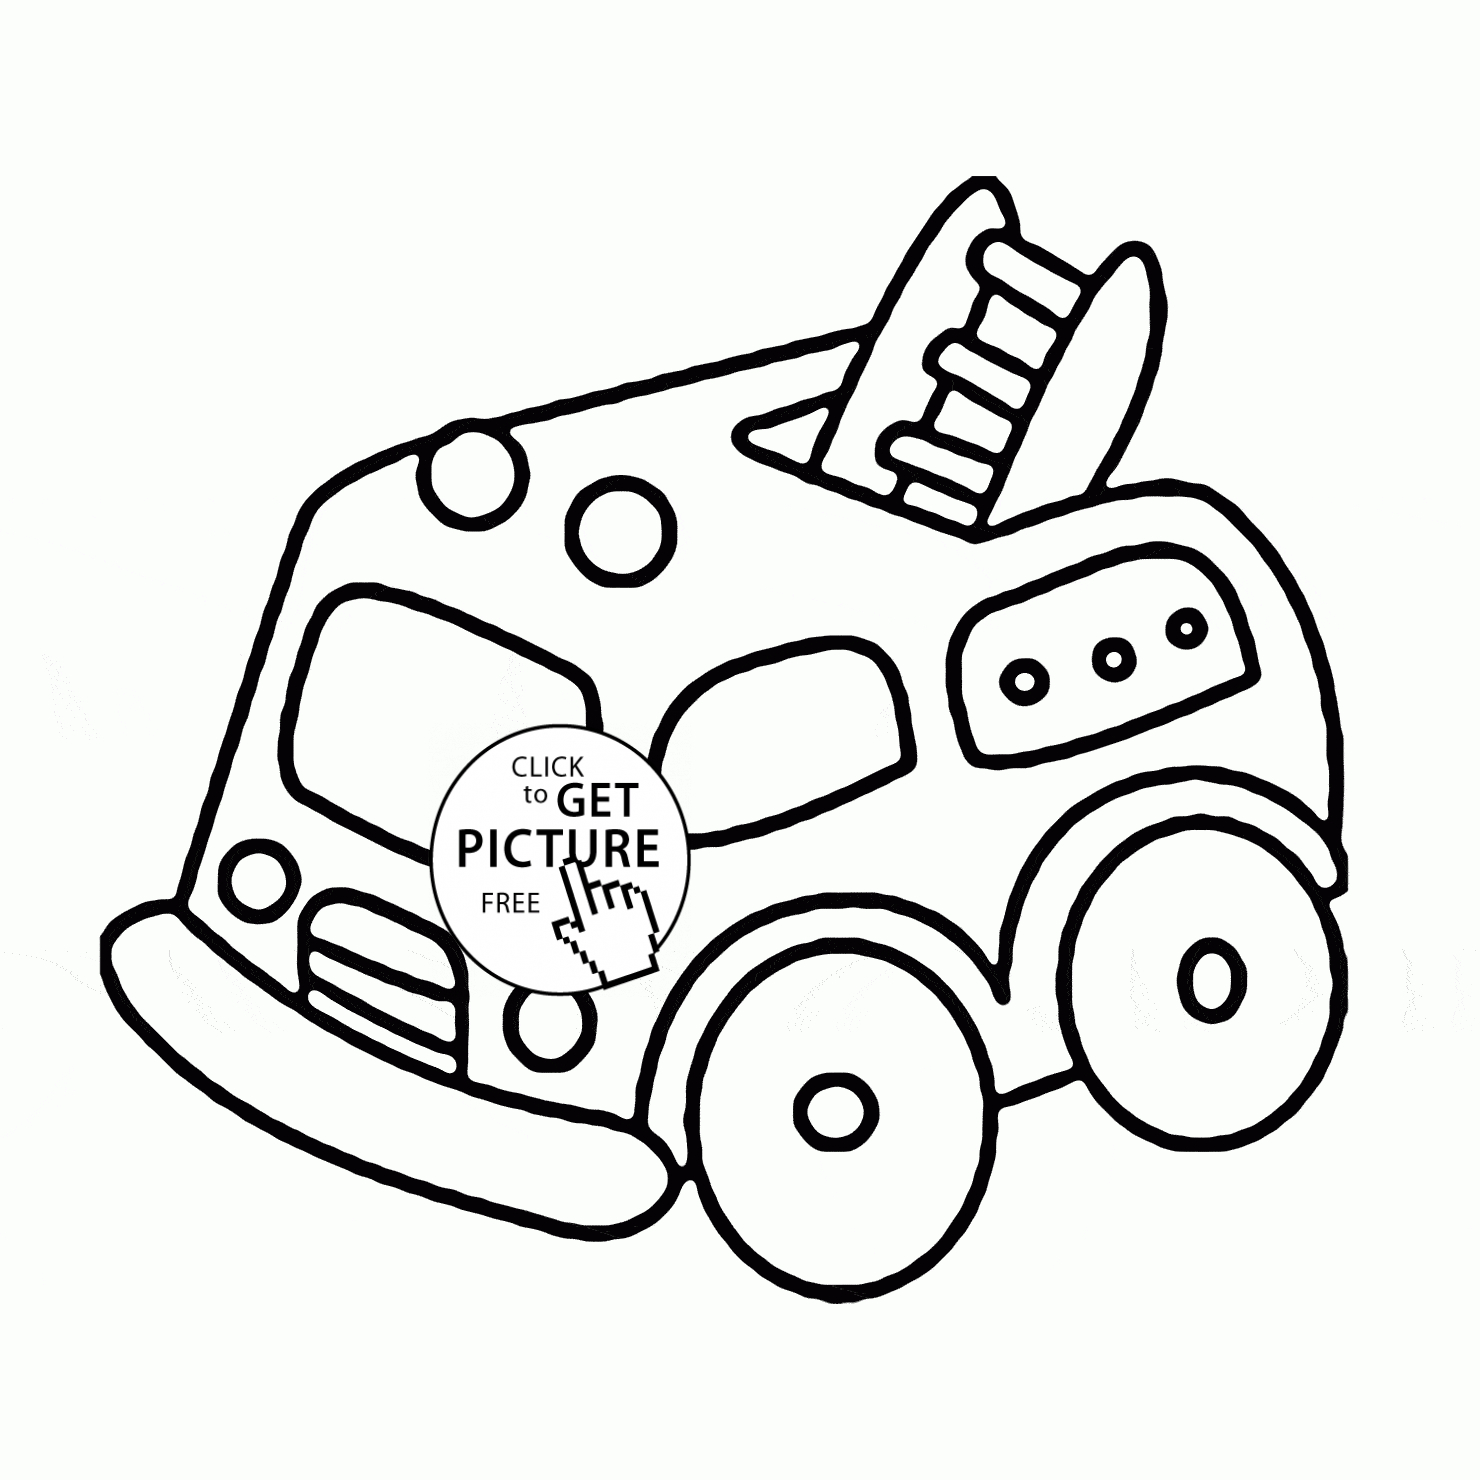 Truck Coloring Pages For Preschoolers Coloring Pages Outstanding Free Fire Truck Coloringes Preschool